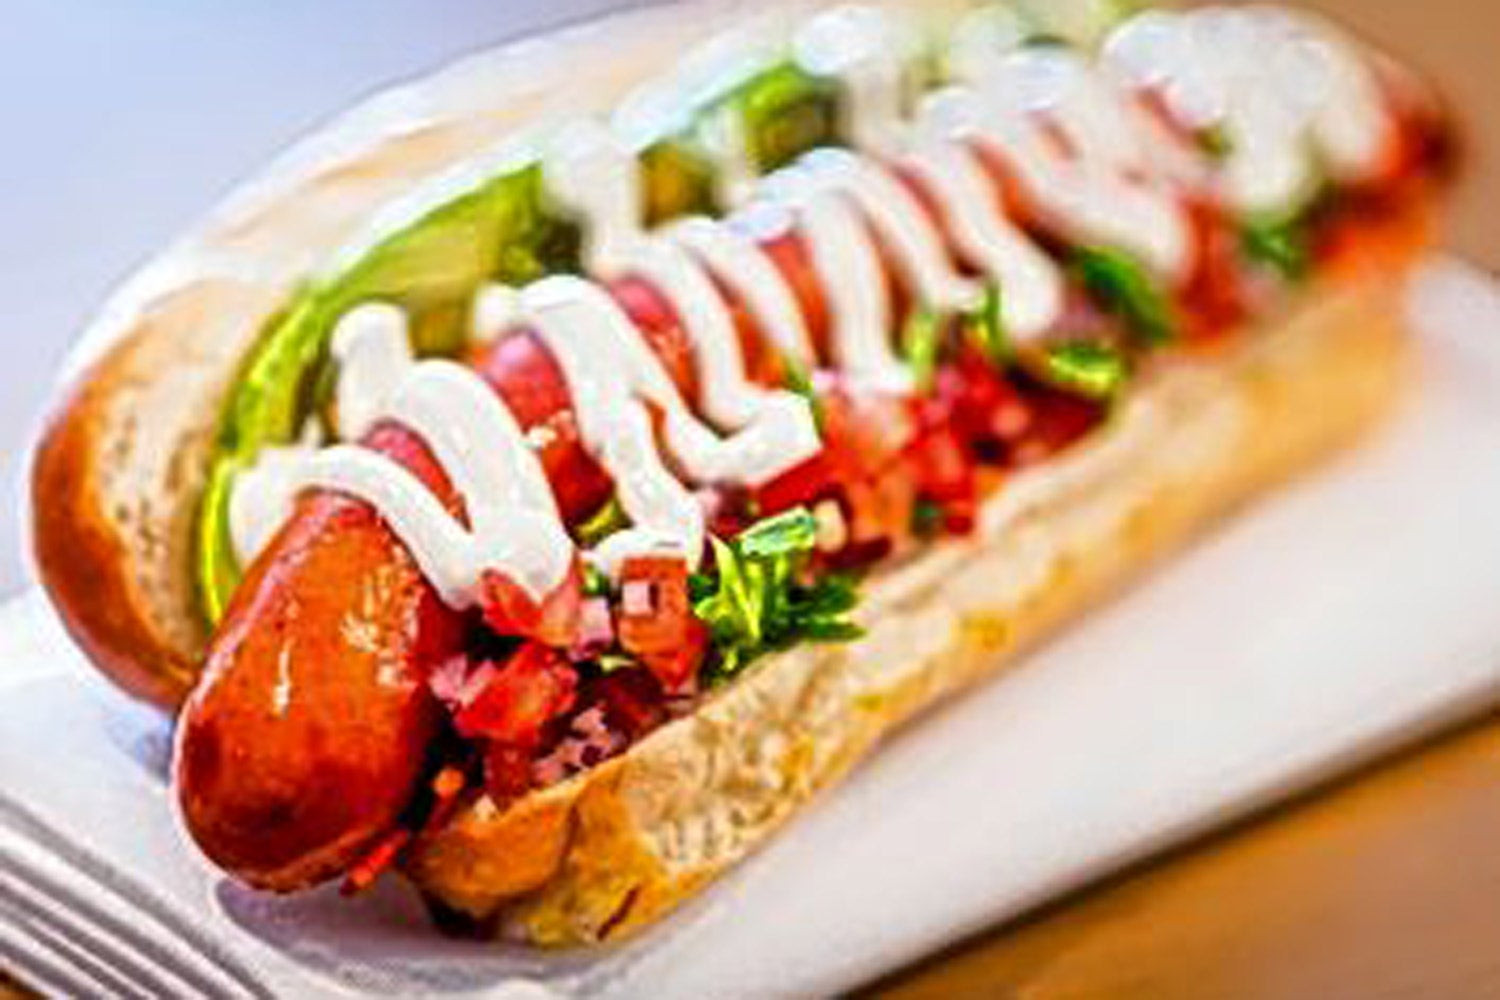 Gourmet Hot Dogs
 The wurst can happen… boom in the gourmet hot dog trend